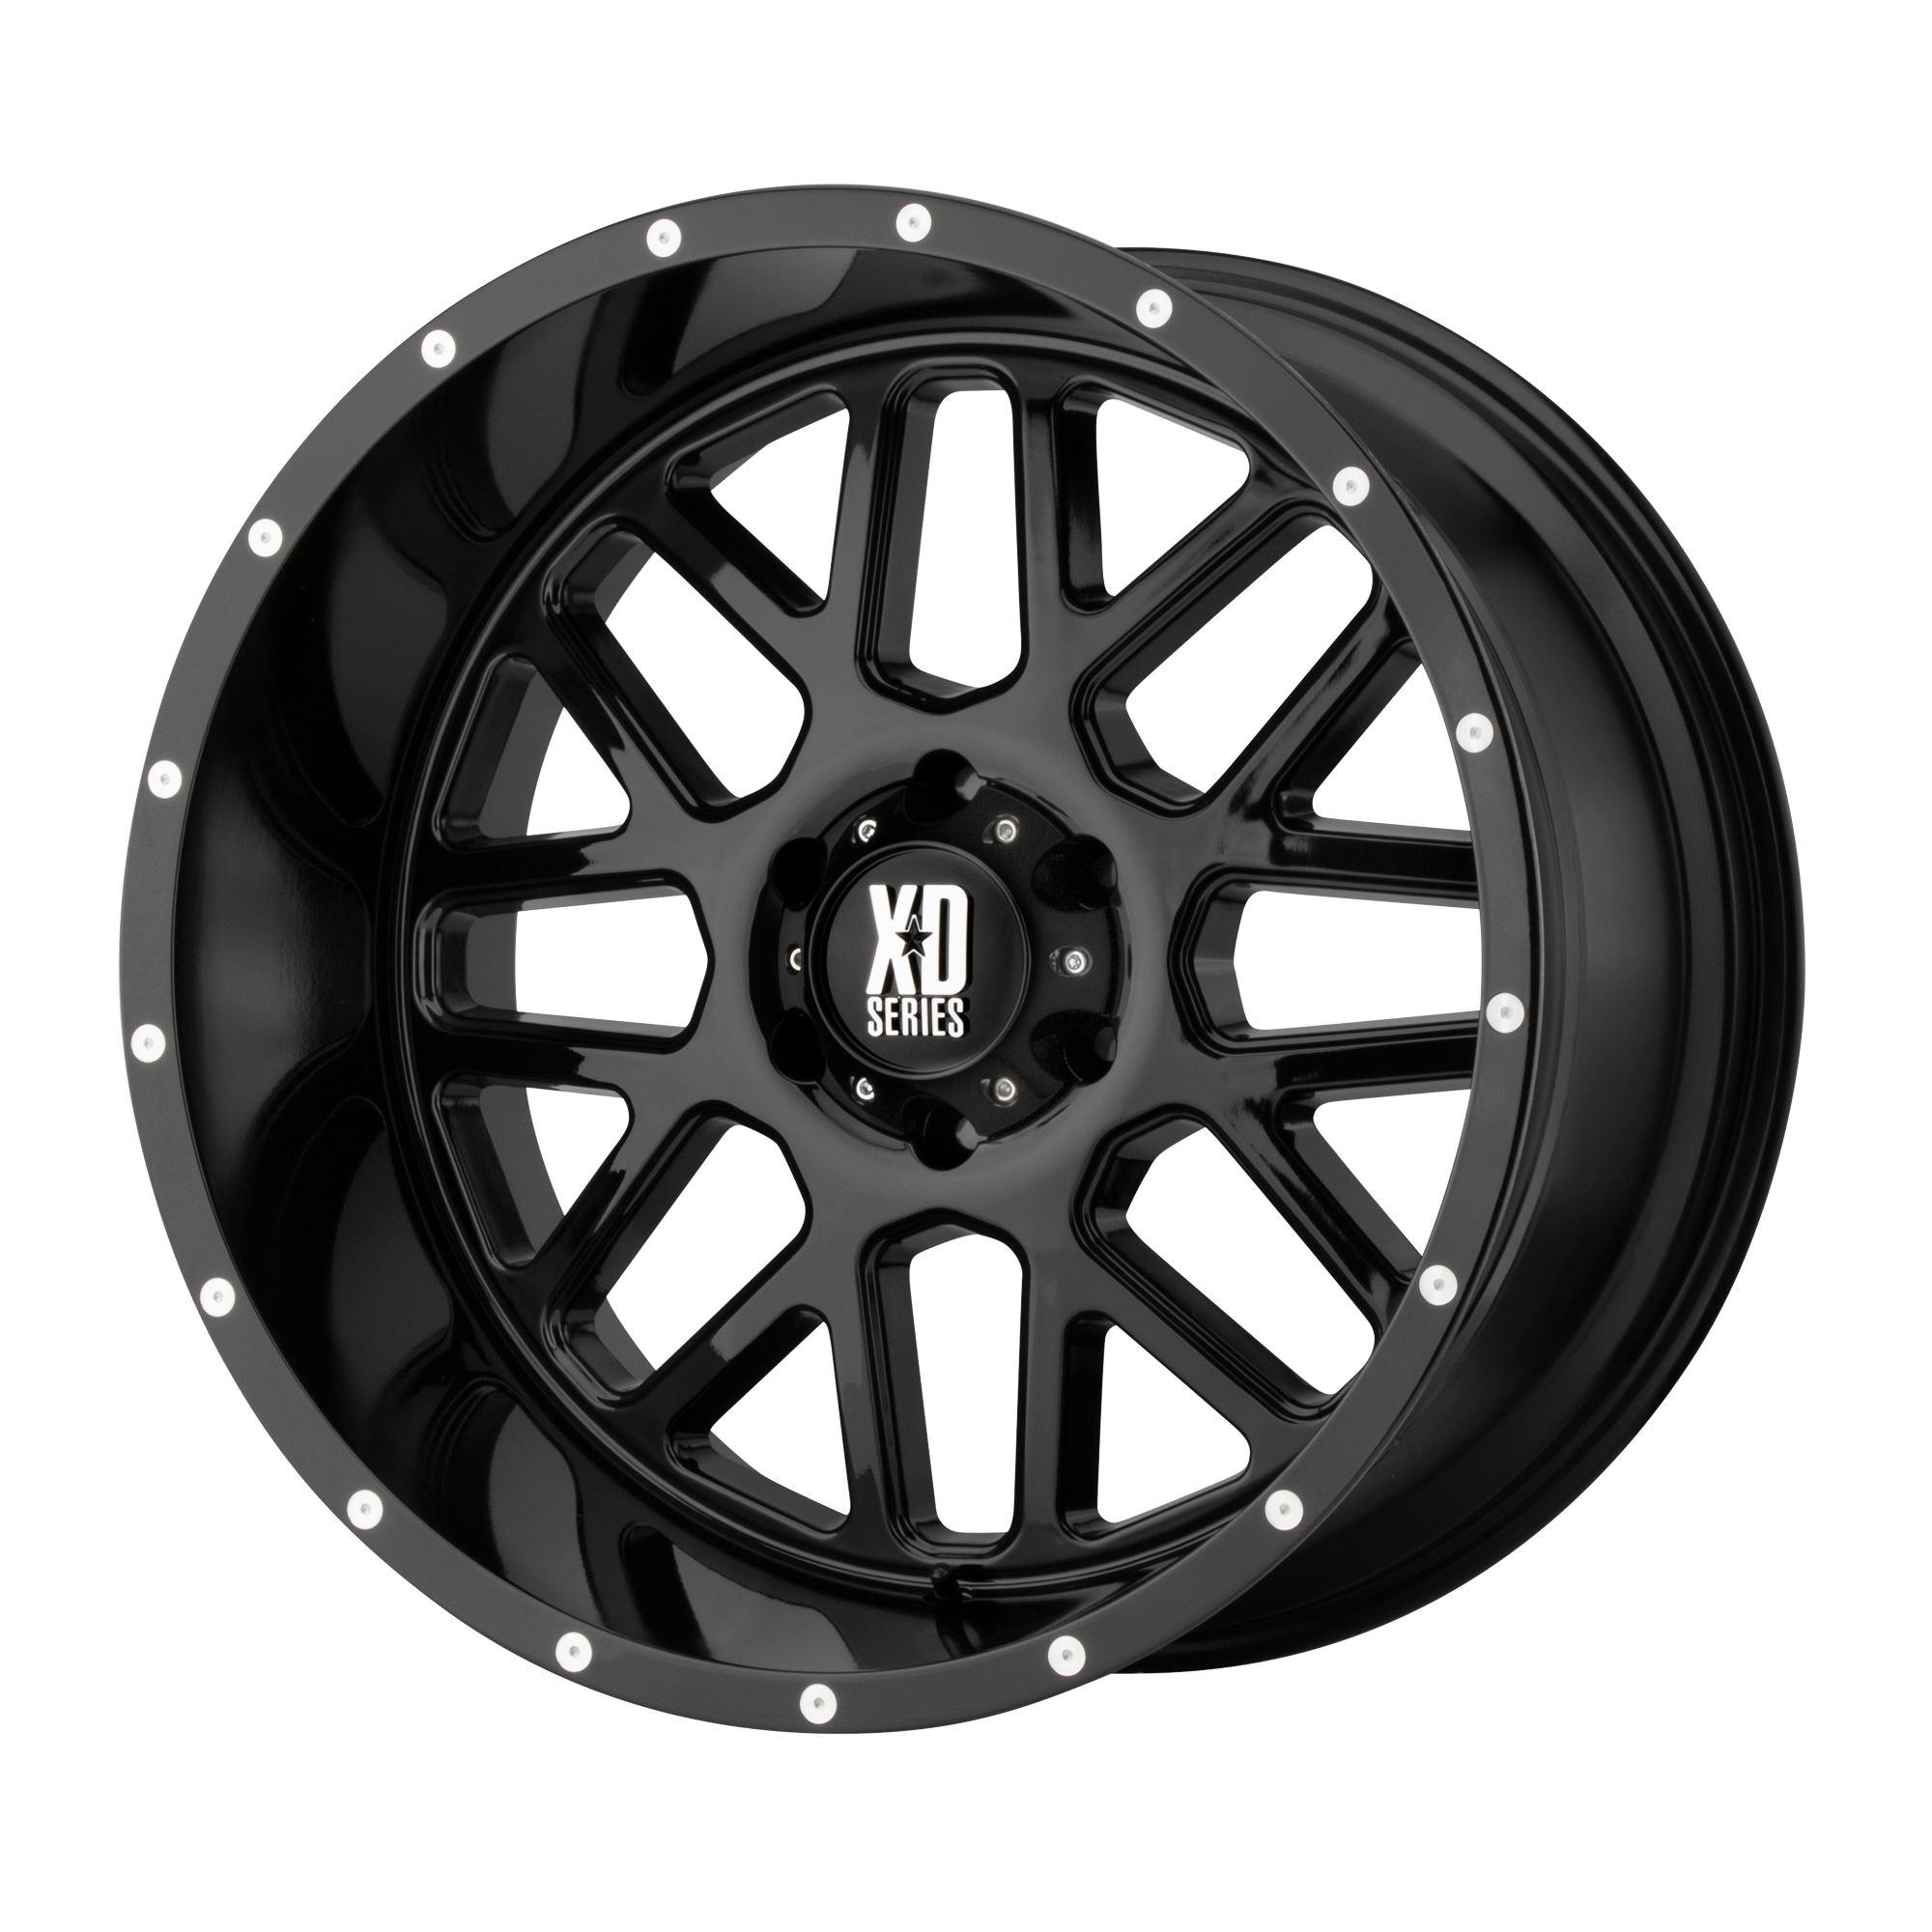 GRENADE 20x10 5x139.70 GLOSS BLACK (-24 mm) - Tires and Engine Performance